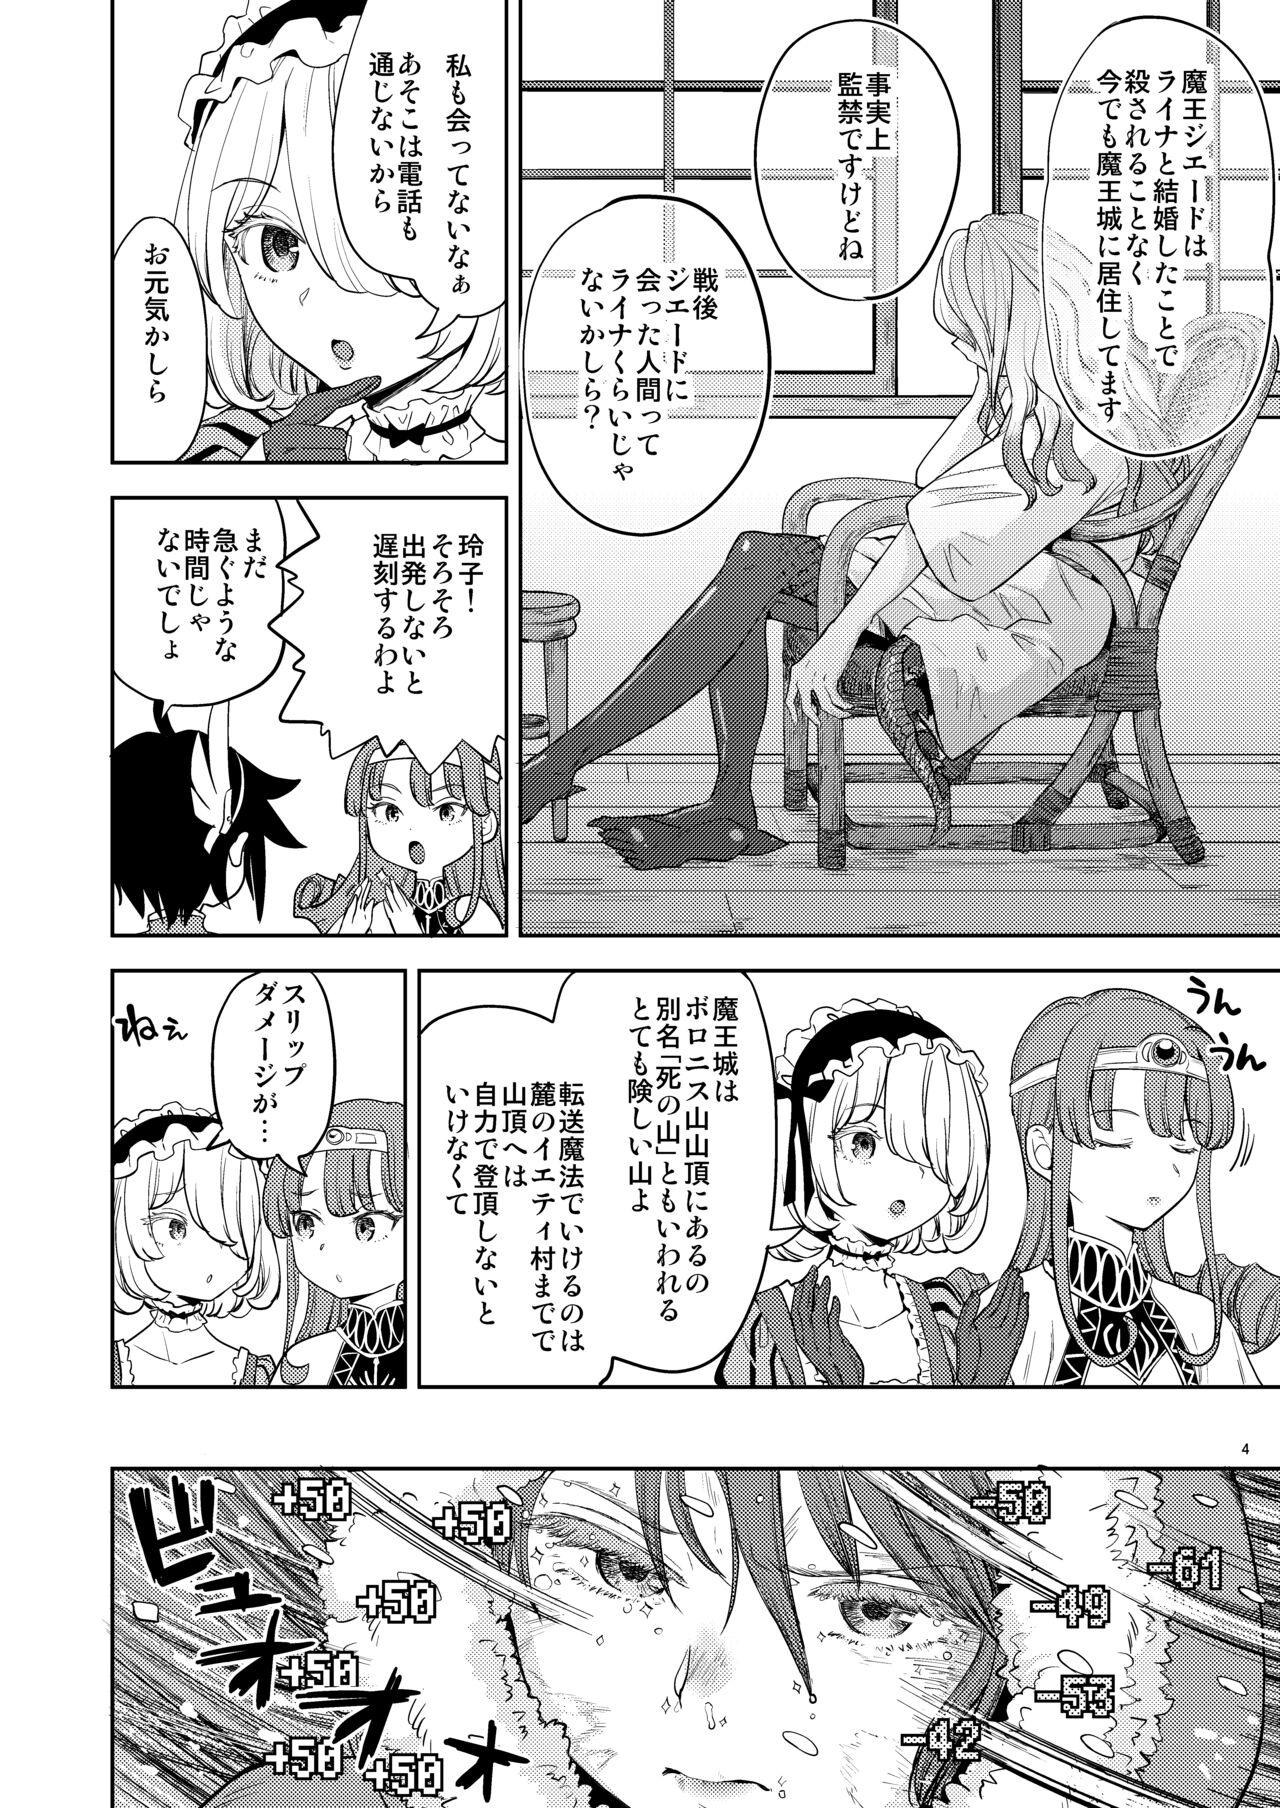 Reverse Cowgirl 女勇者に転生したら魔族の妻が5人もいるらしい5 - Original Eurobabe - Page 5